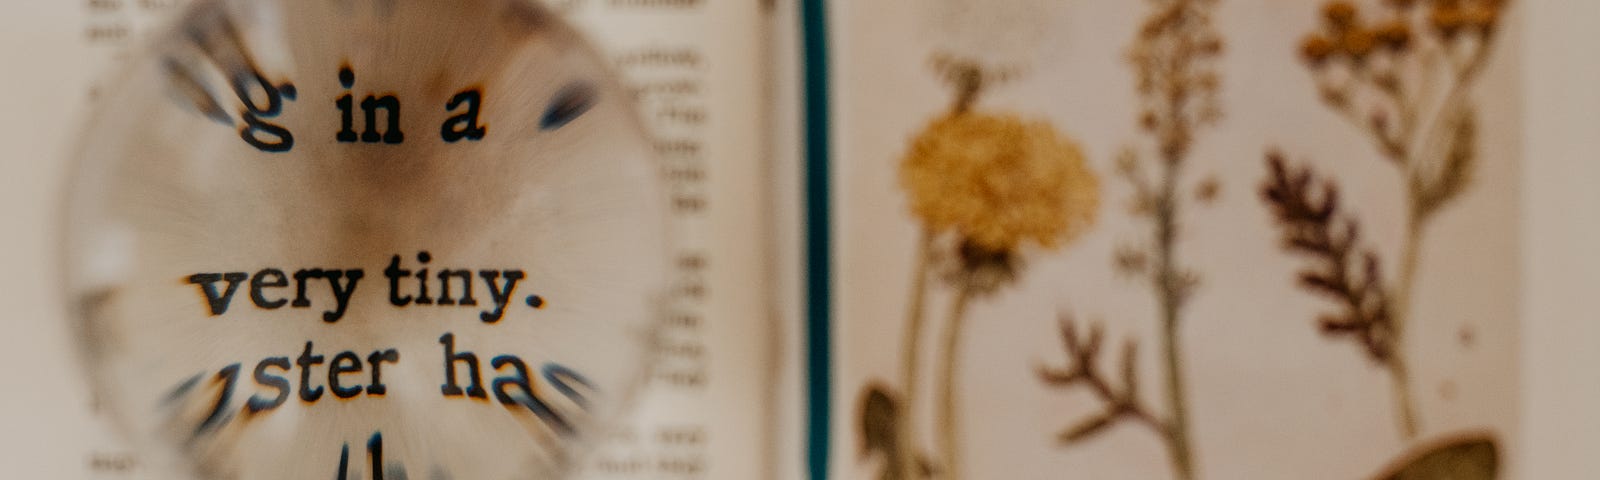 An old-fashioned book about — botany, probably? There are engravings of dandelions — and a magnifying glass allowing us to see the words “very tiny.”